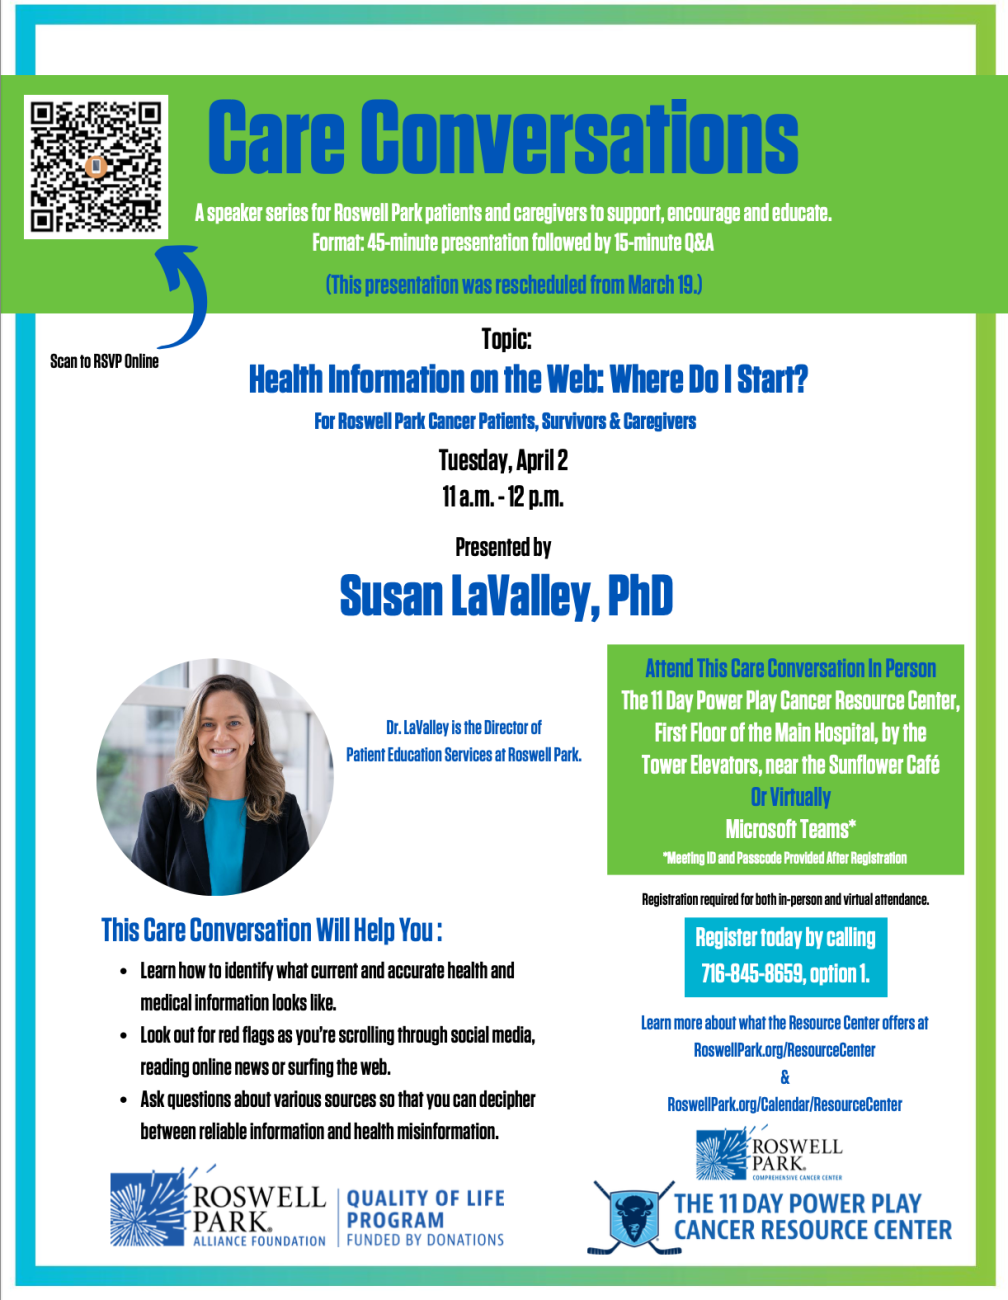 Poster for Care Conversations event about finding health information on the internet